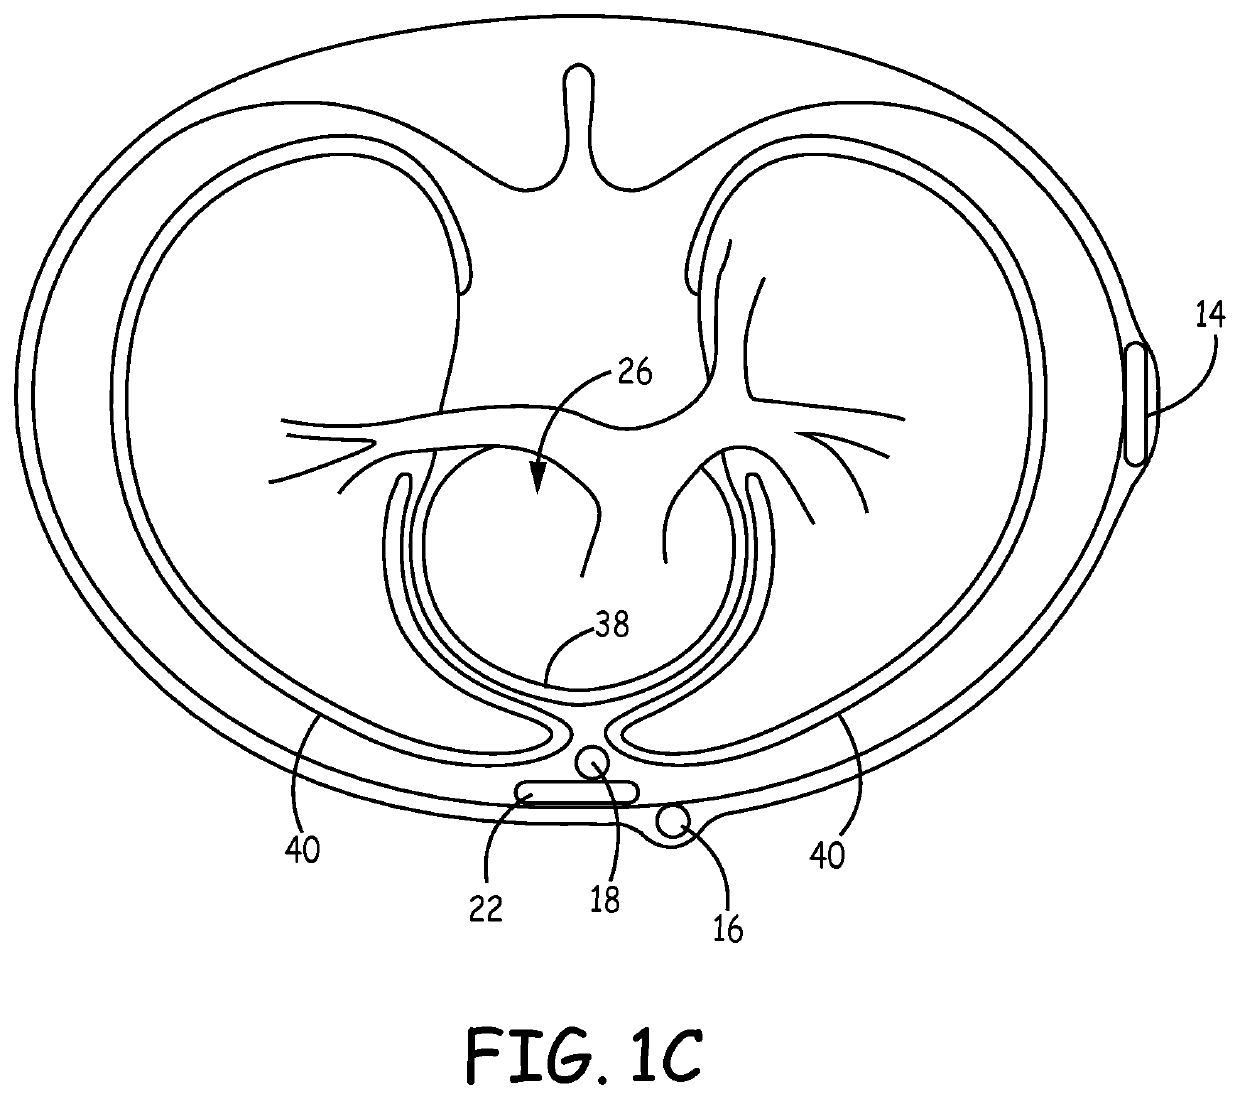 Implantable cardioverter-defibrillator (ICD) system including substernal pacing lead